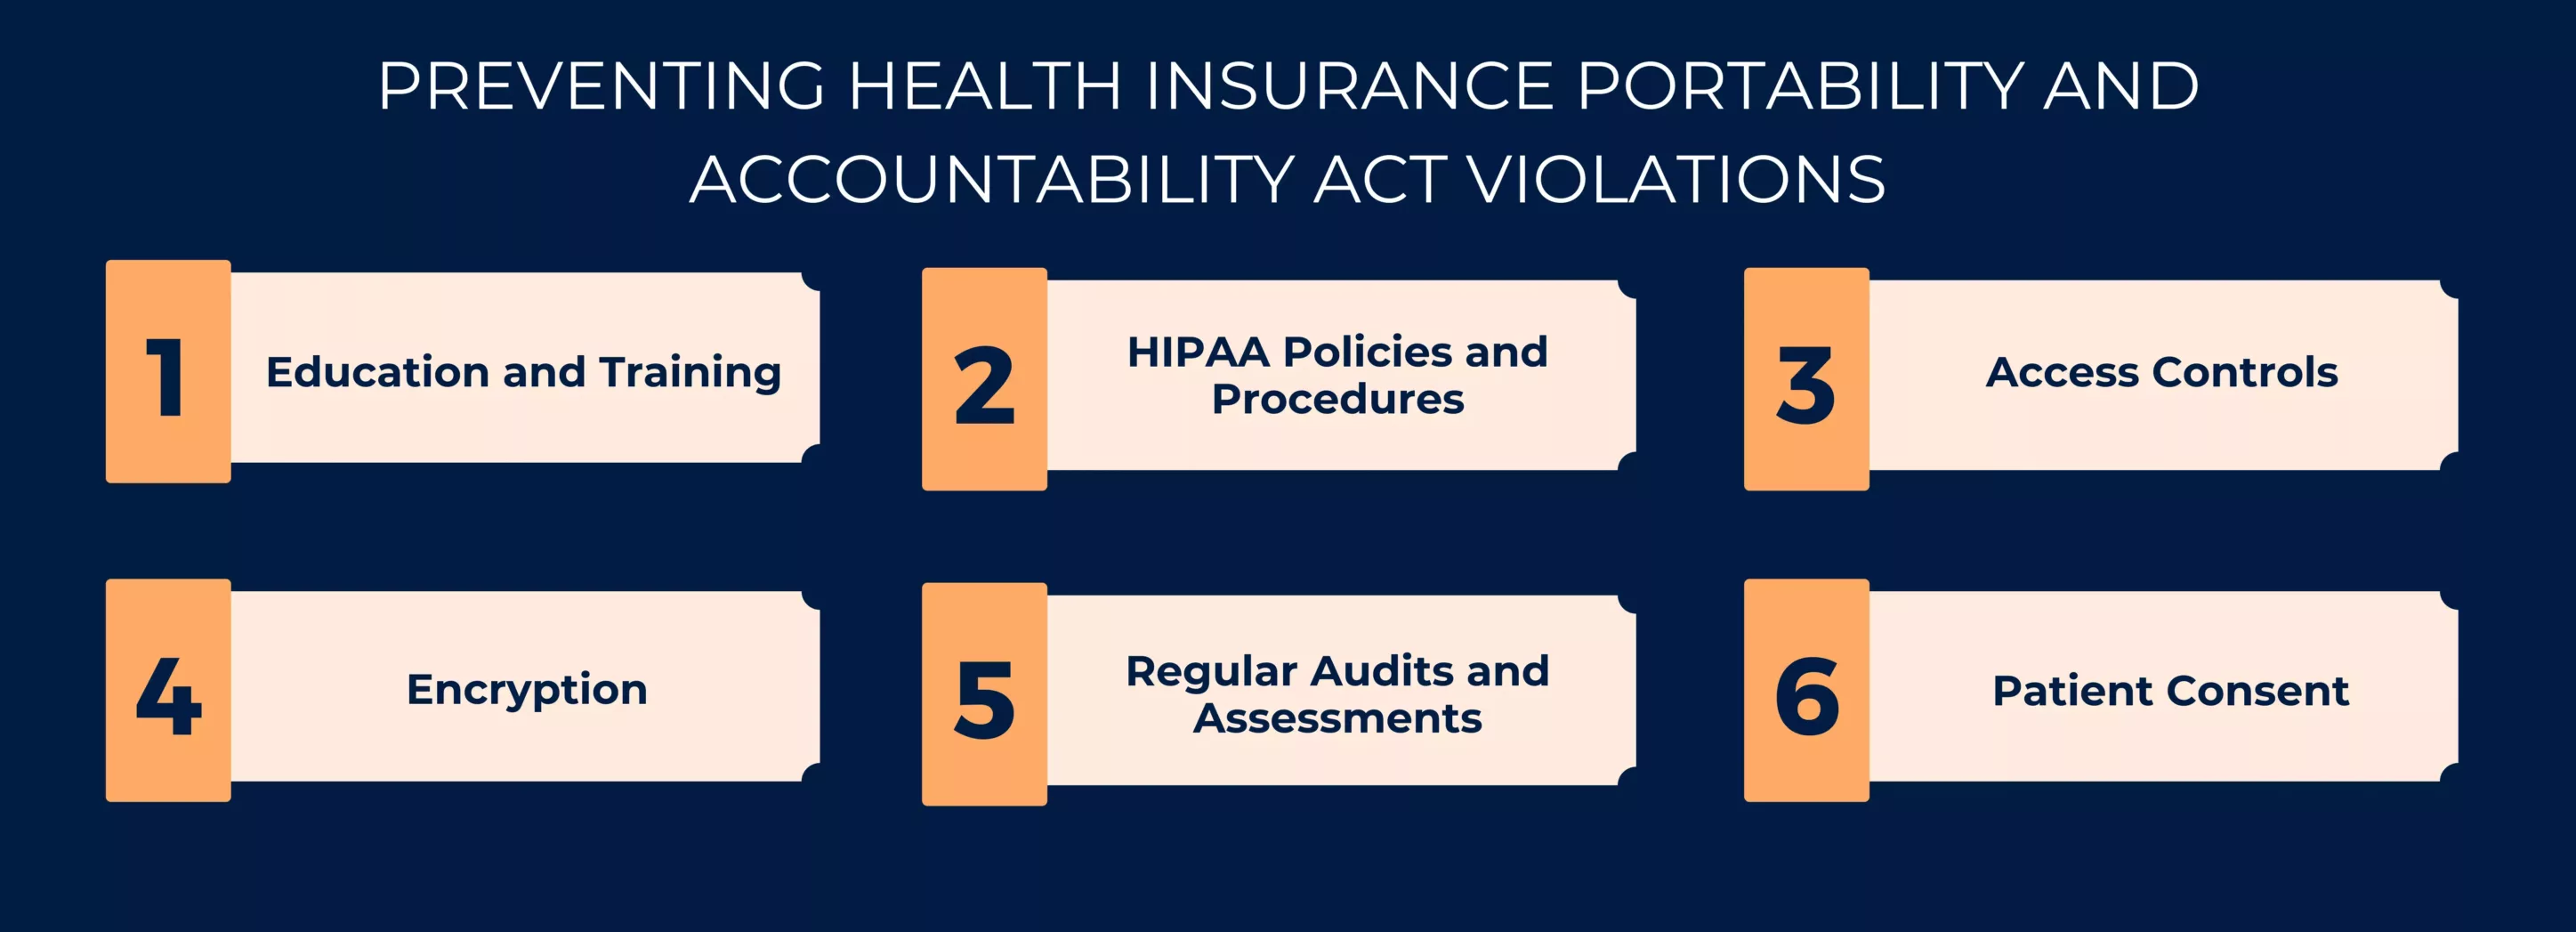 Preventing Health Insurance Portability and accountability act violations